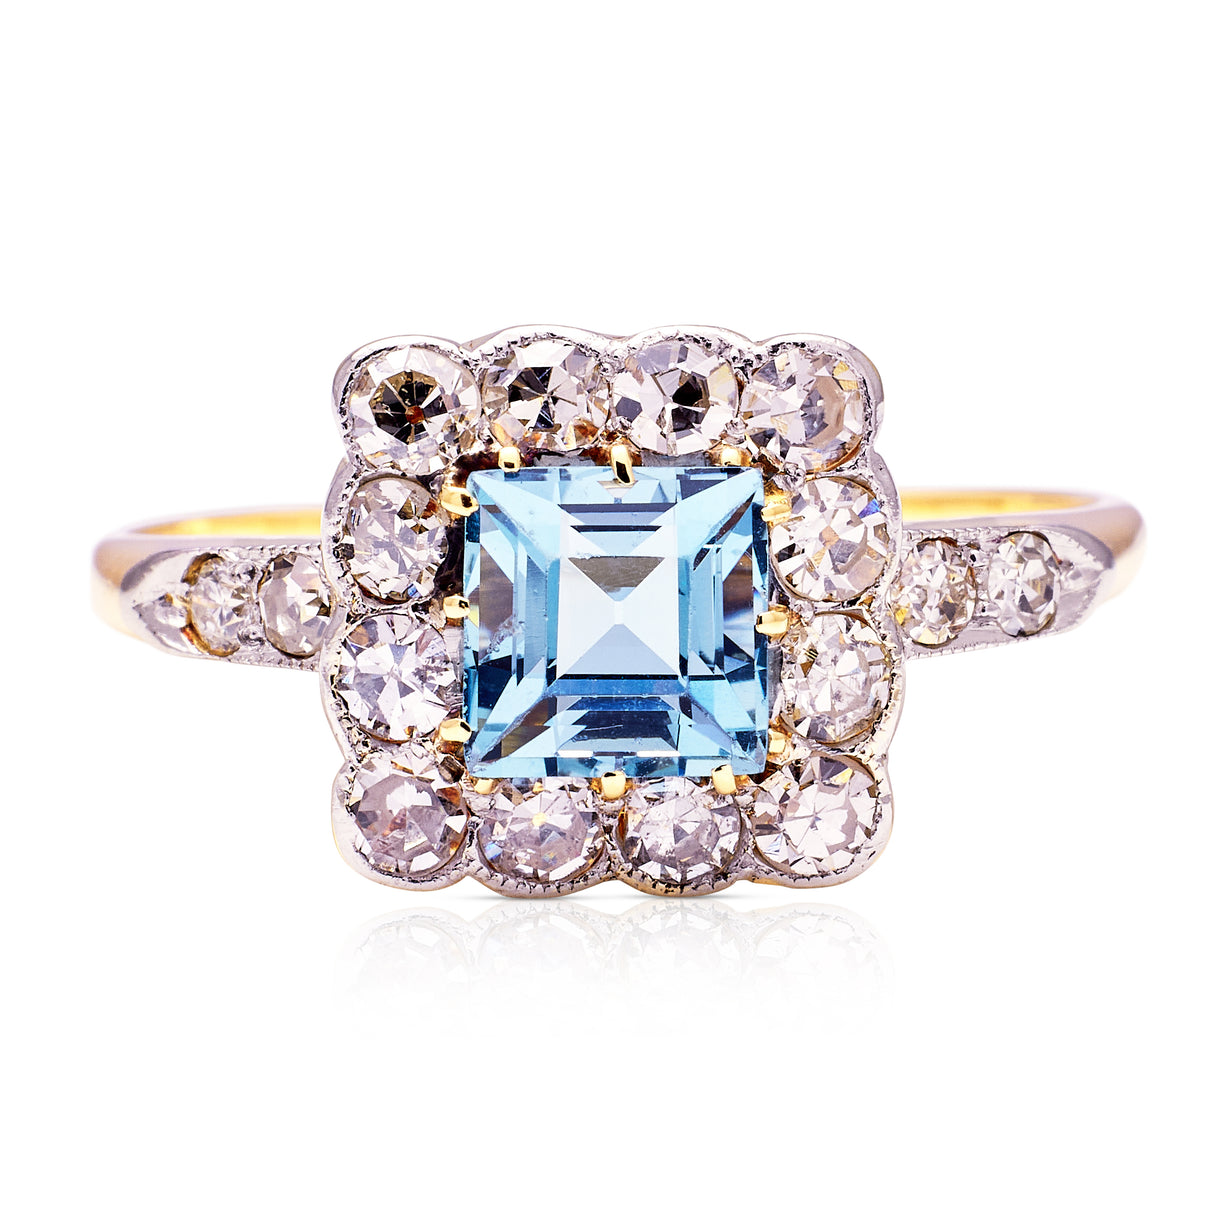 Antique, Edwardian Aquamarine and Diamond Square Cluster Ring, 18ct Yellow Gold and Platinum front view